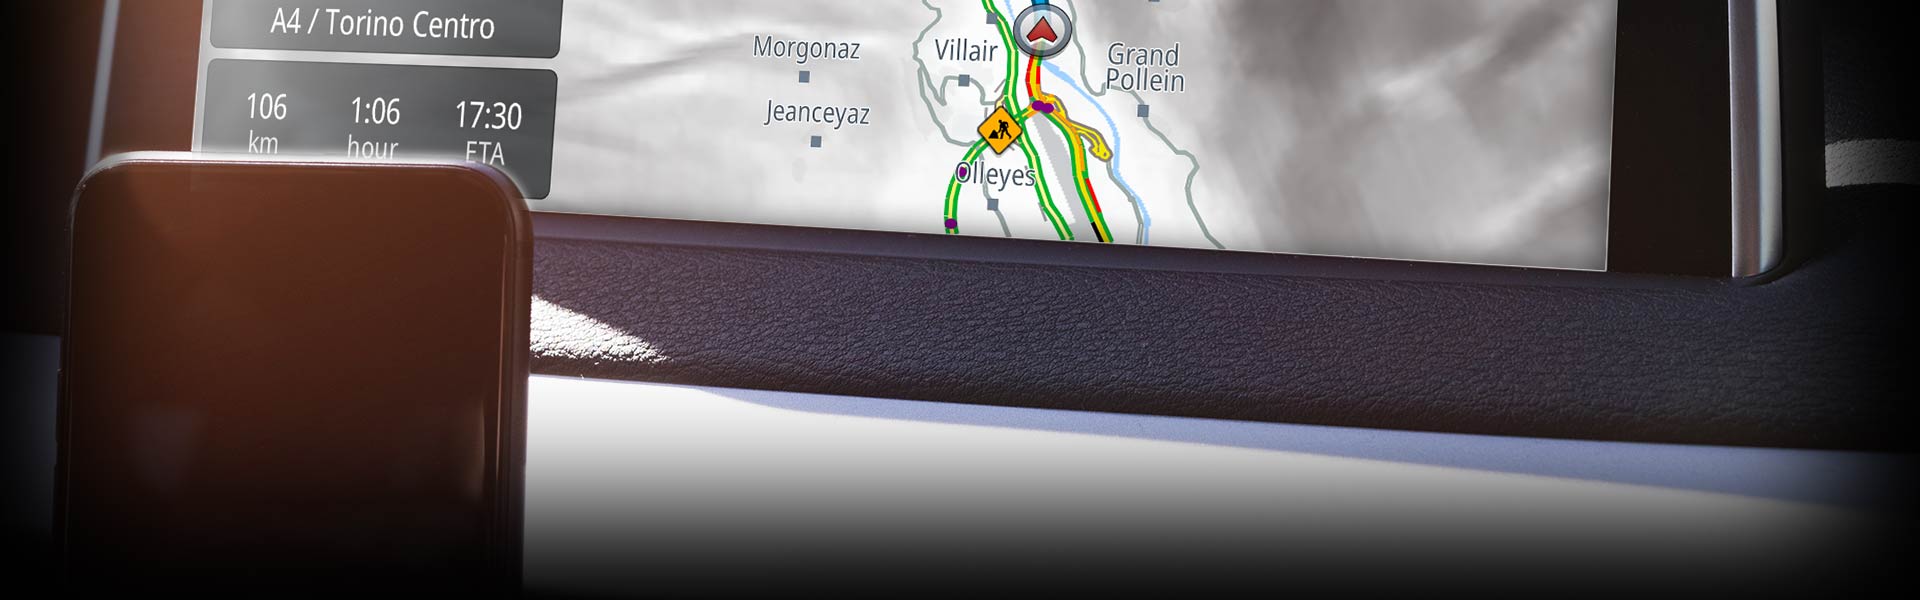 Genius Maps GPS navigation app lets you connect to the in-car infotainment systems of certain brands of cars.